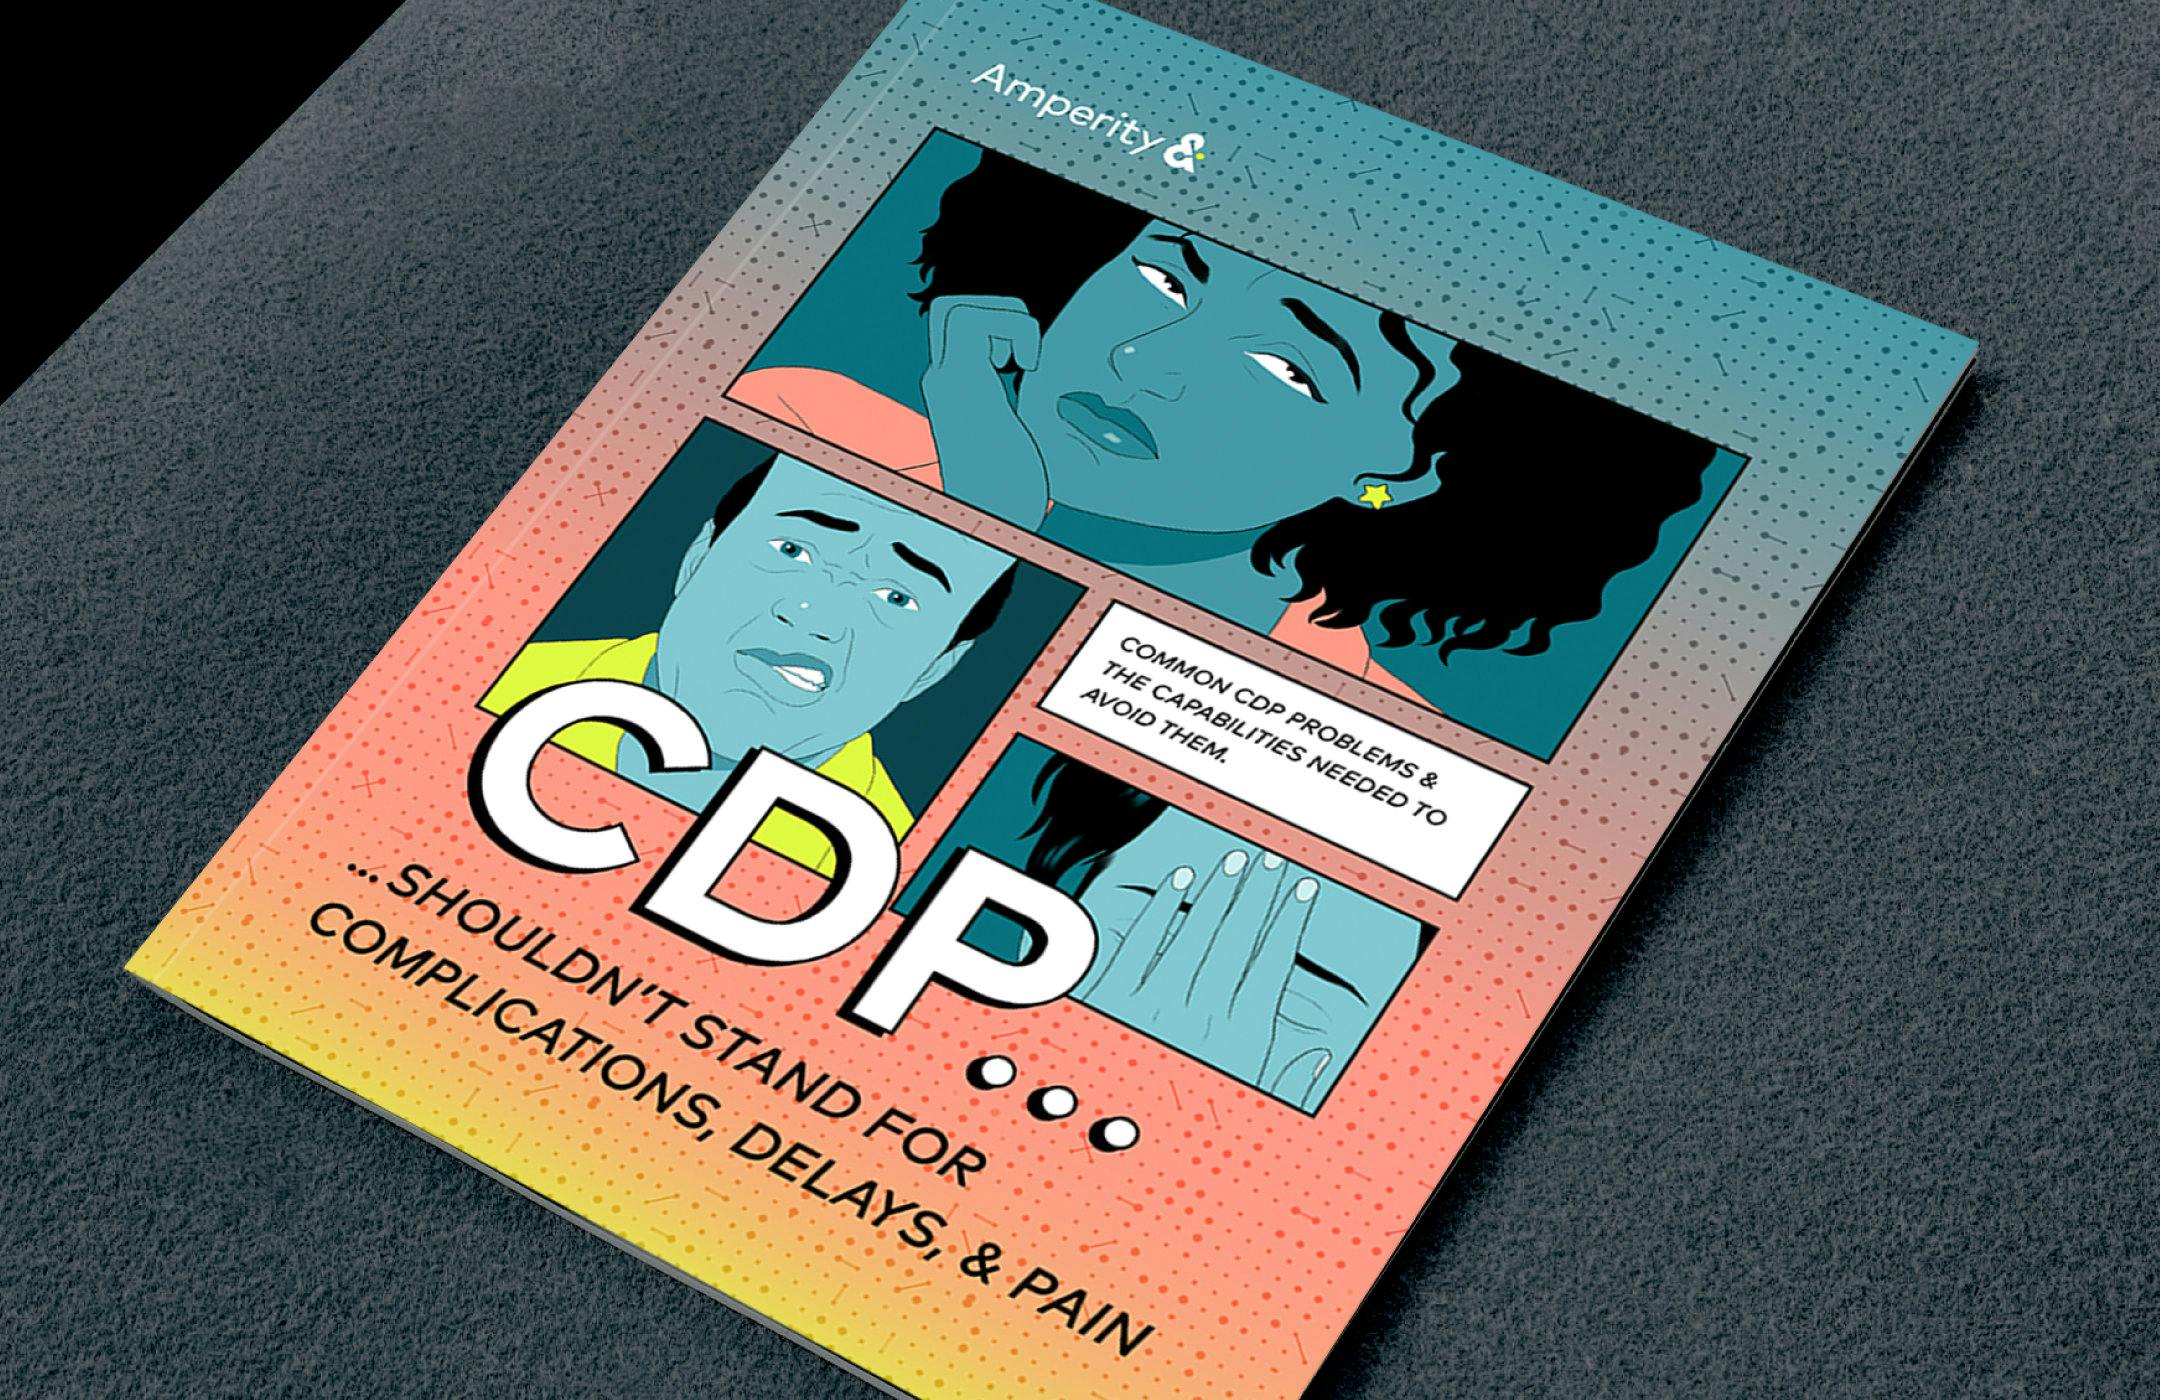 An image of the cover of the guide "CDP shouldn't stand for complications, delays and pain" in the style of a comic book